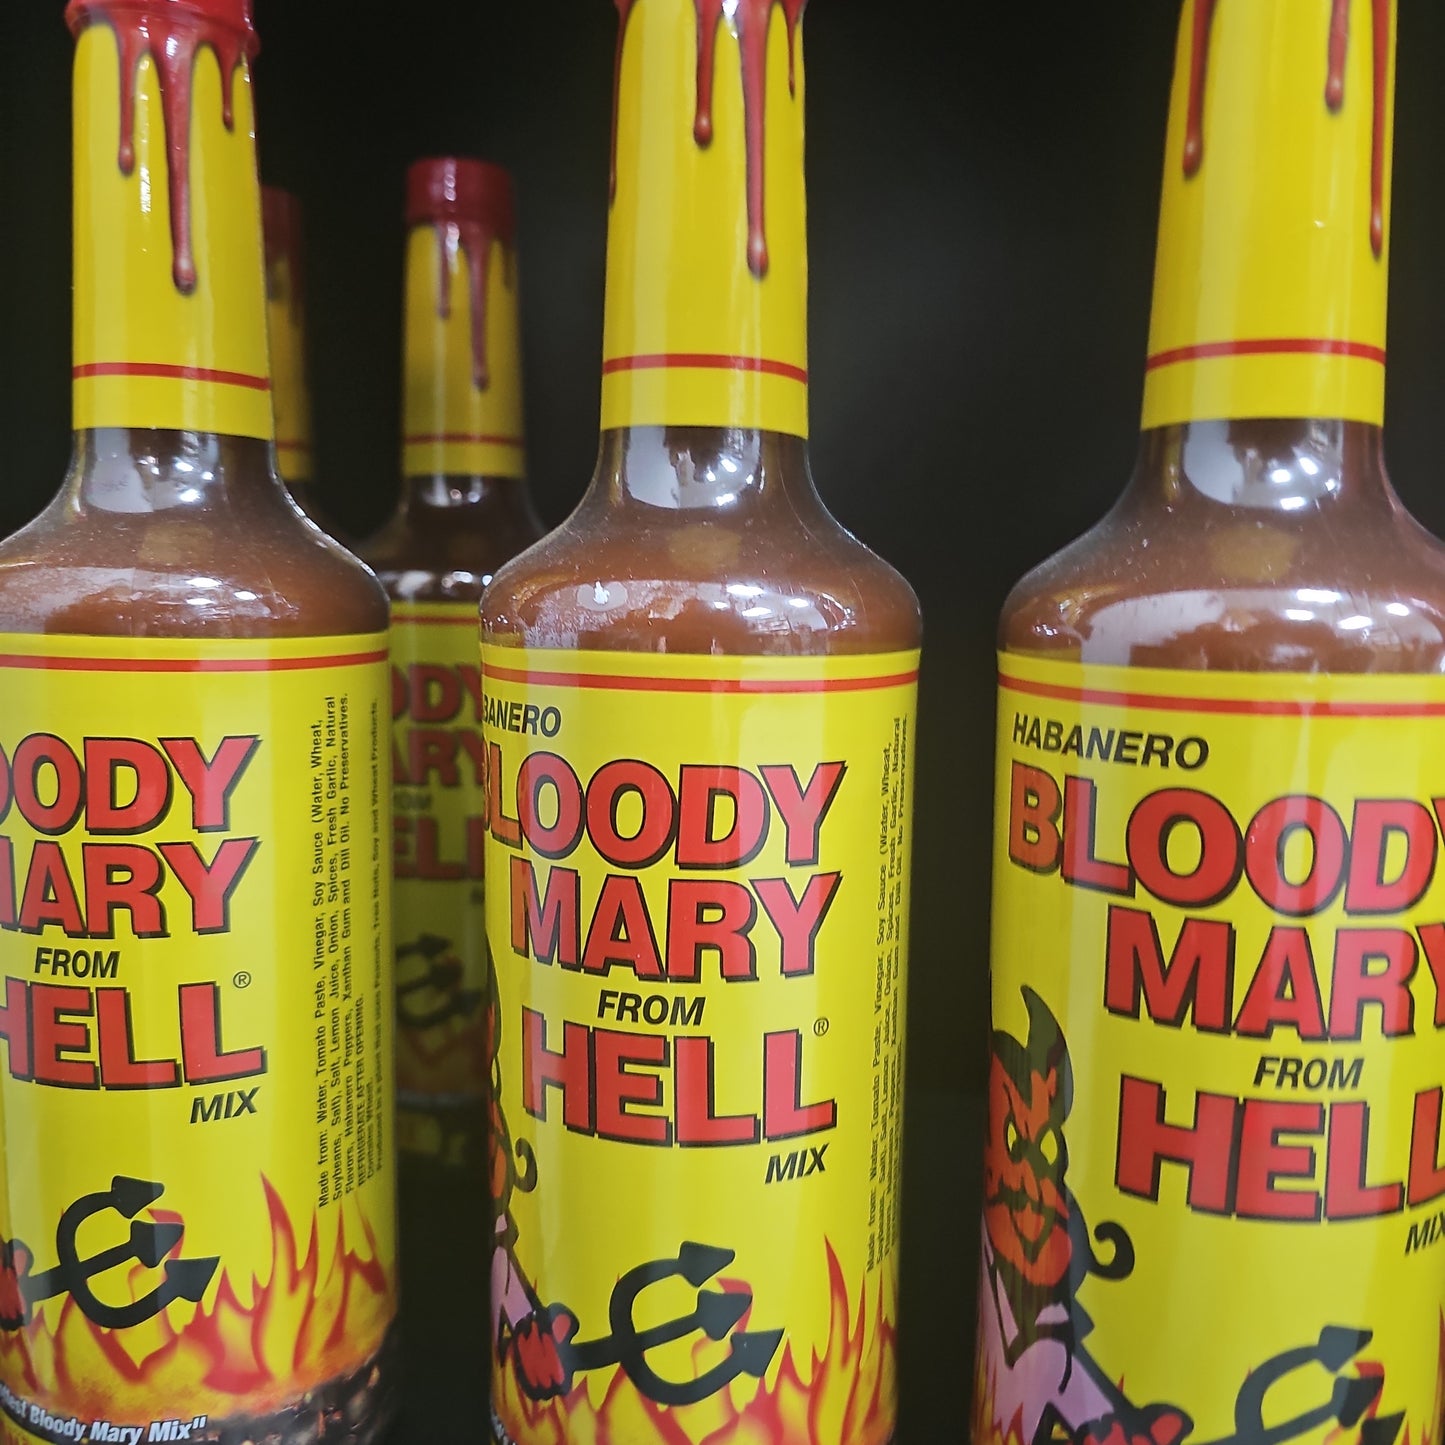 Habanero Bloody Mary from Hell MIx